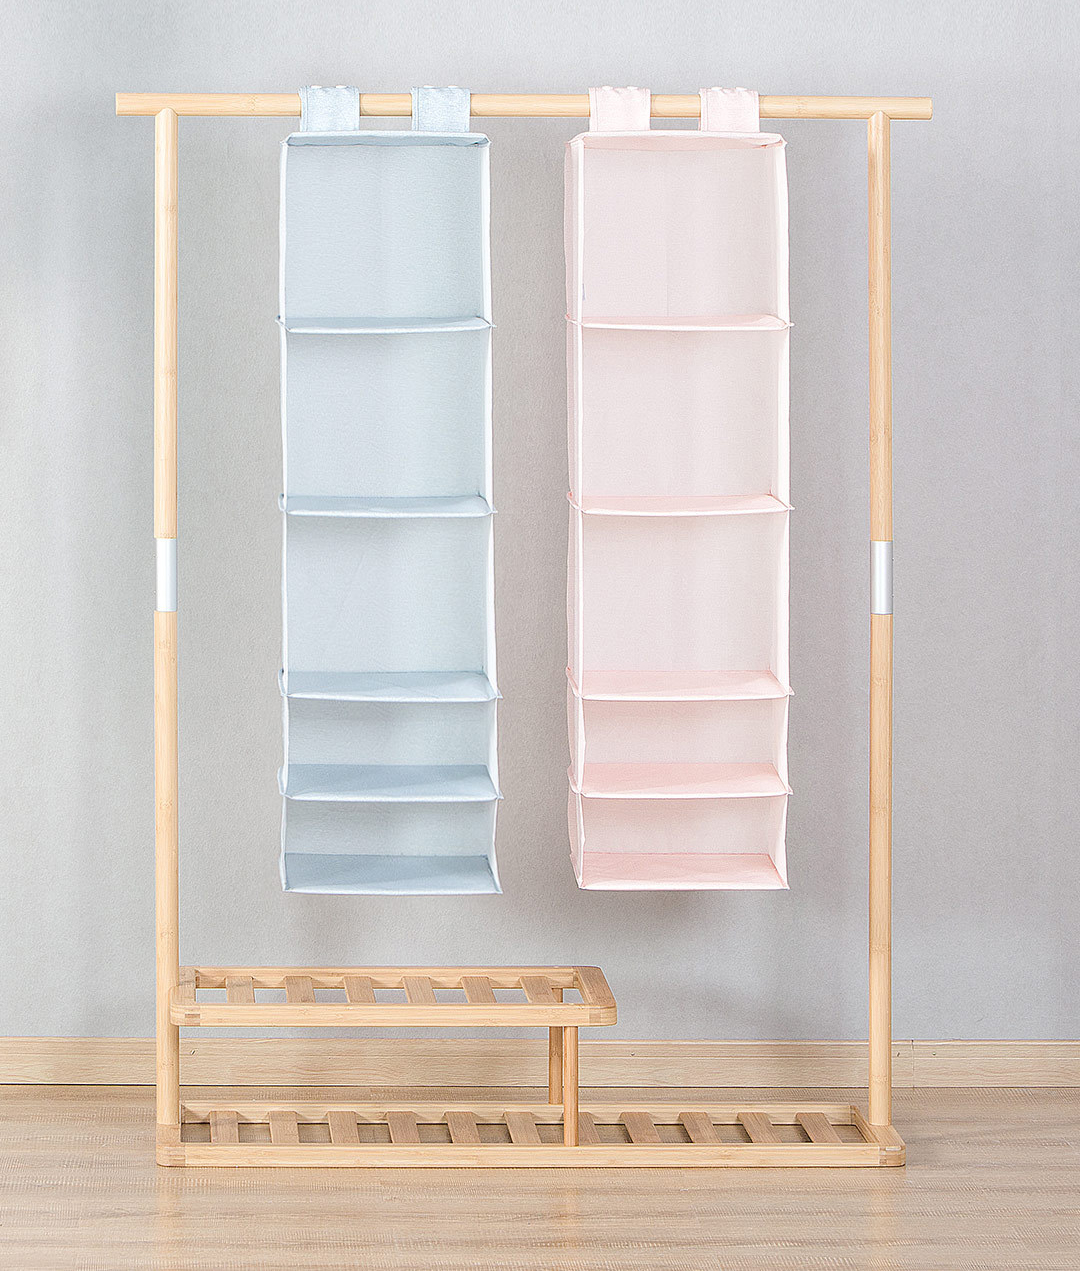 Nature Household 5 Compartment Hanging Fabric Storage Organizer Keeps Your Things Organised Two Colors